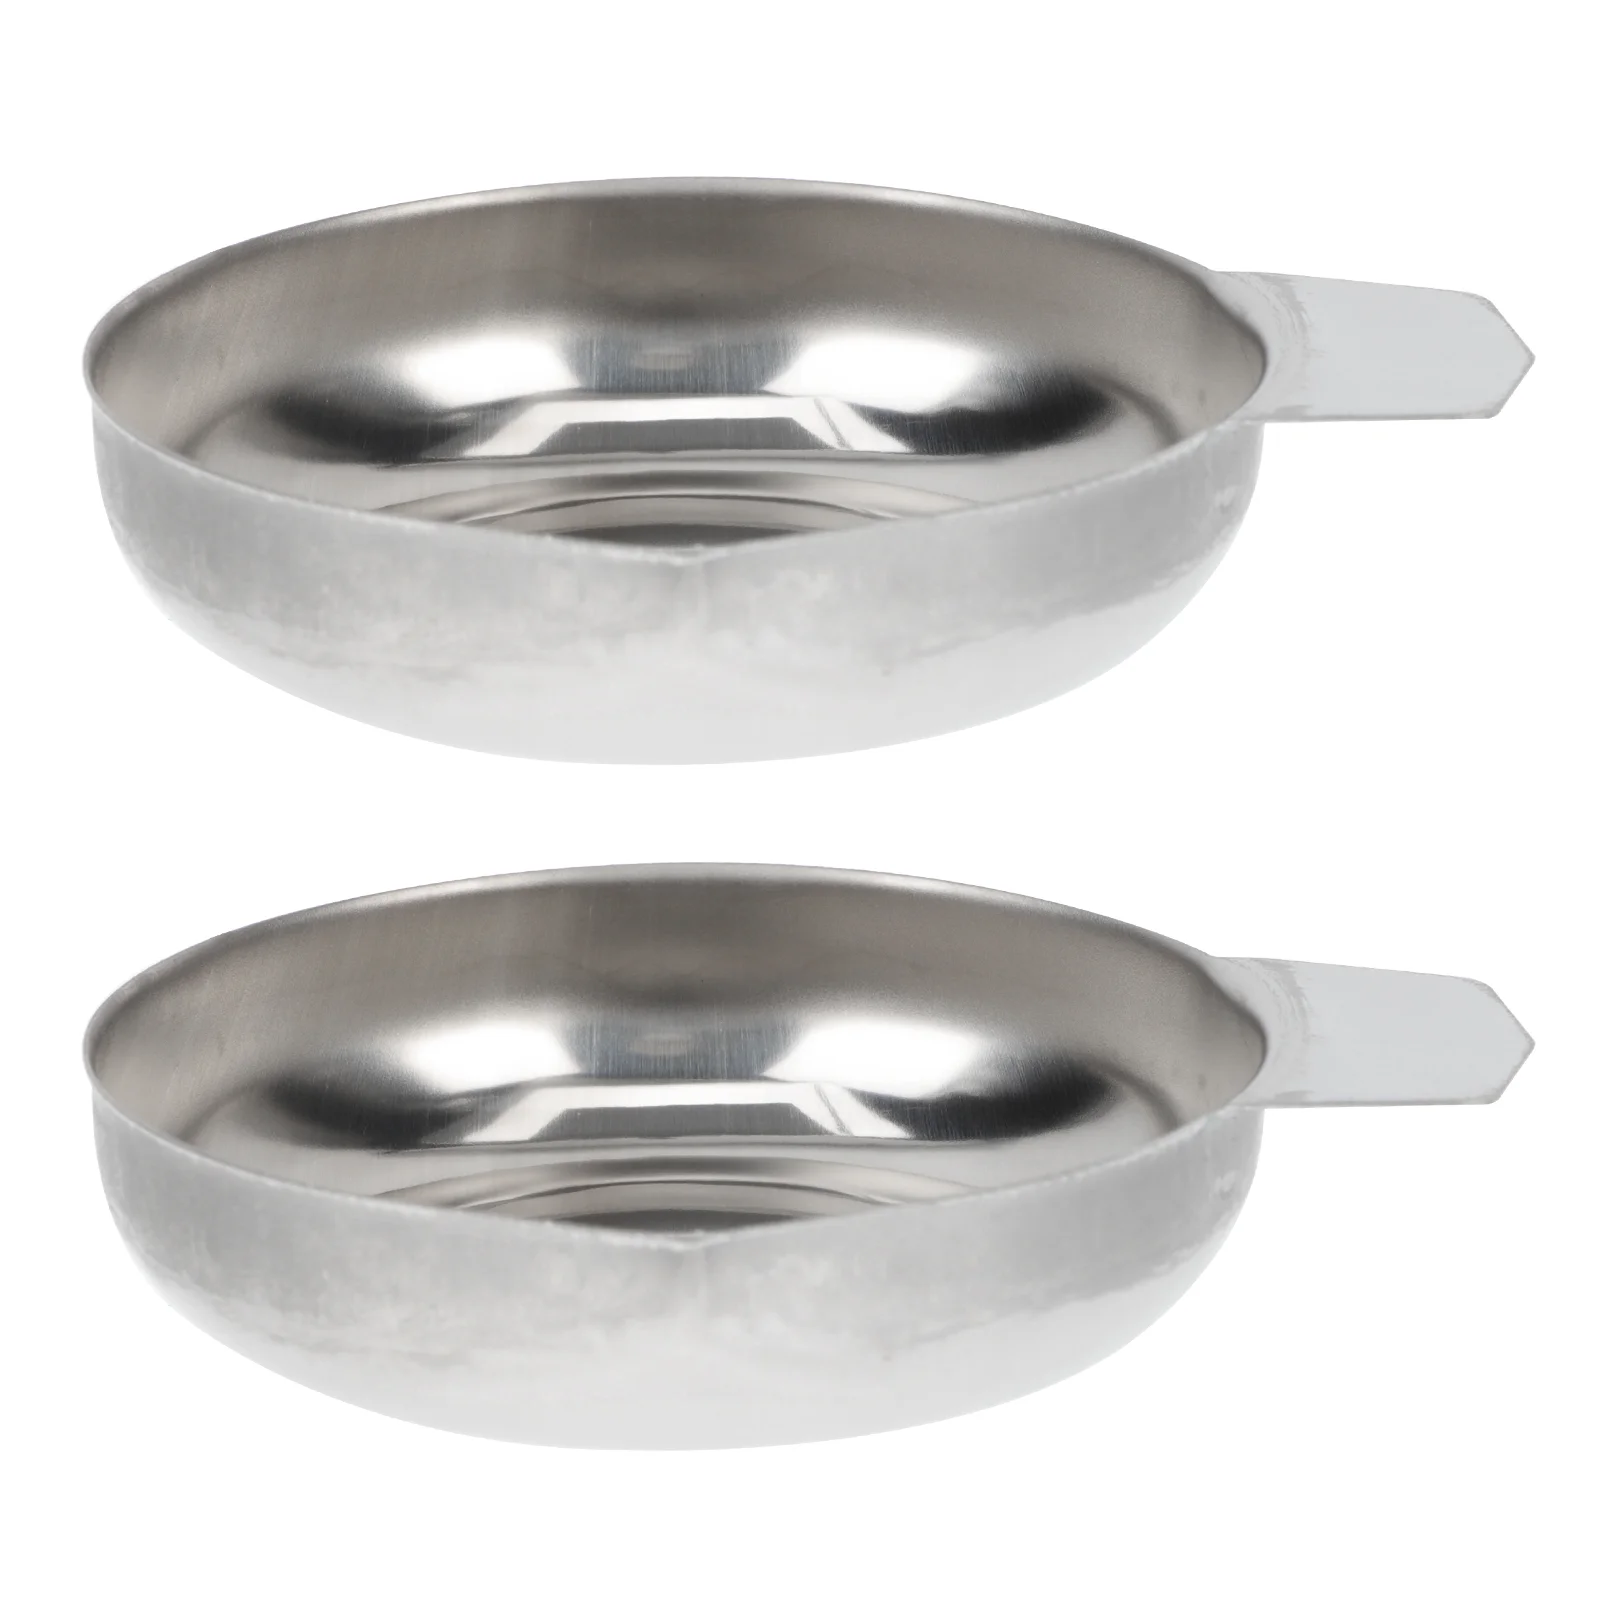 

2 Pcs Stainless Steel Weighing Pan Carat Scale Trays Digital Food Electronic Accessory Mini Rack Measuring Cup Dish Pet